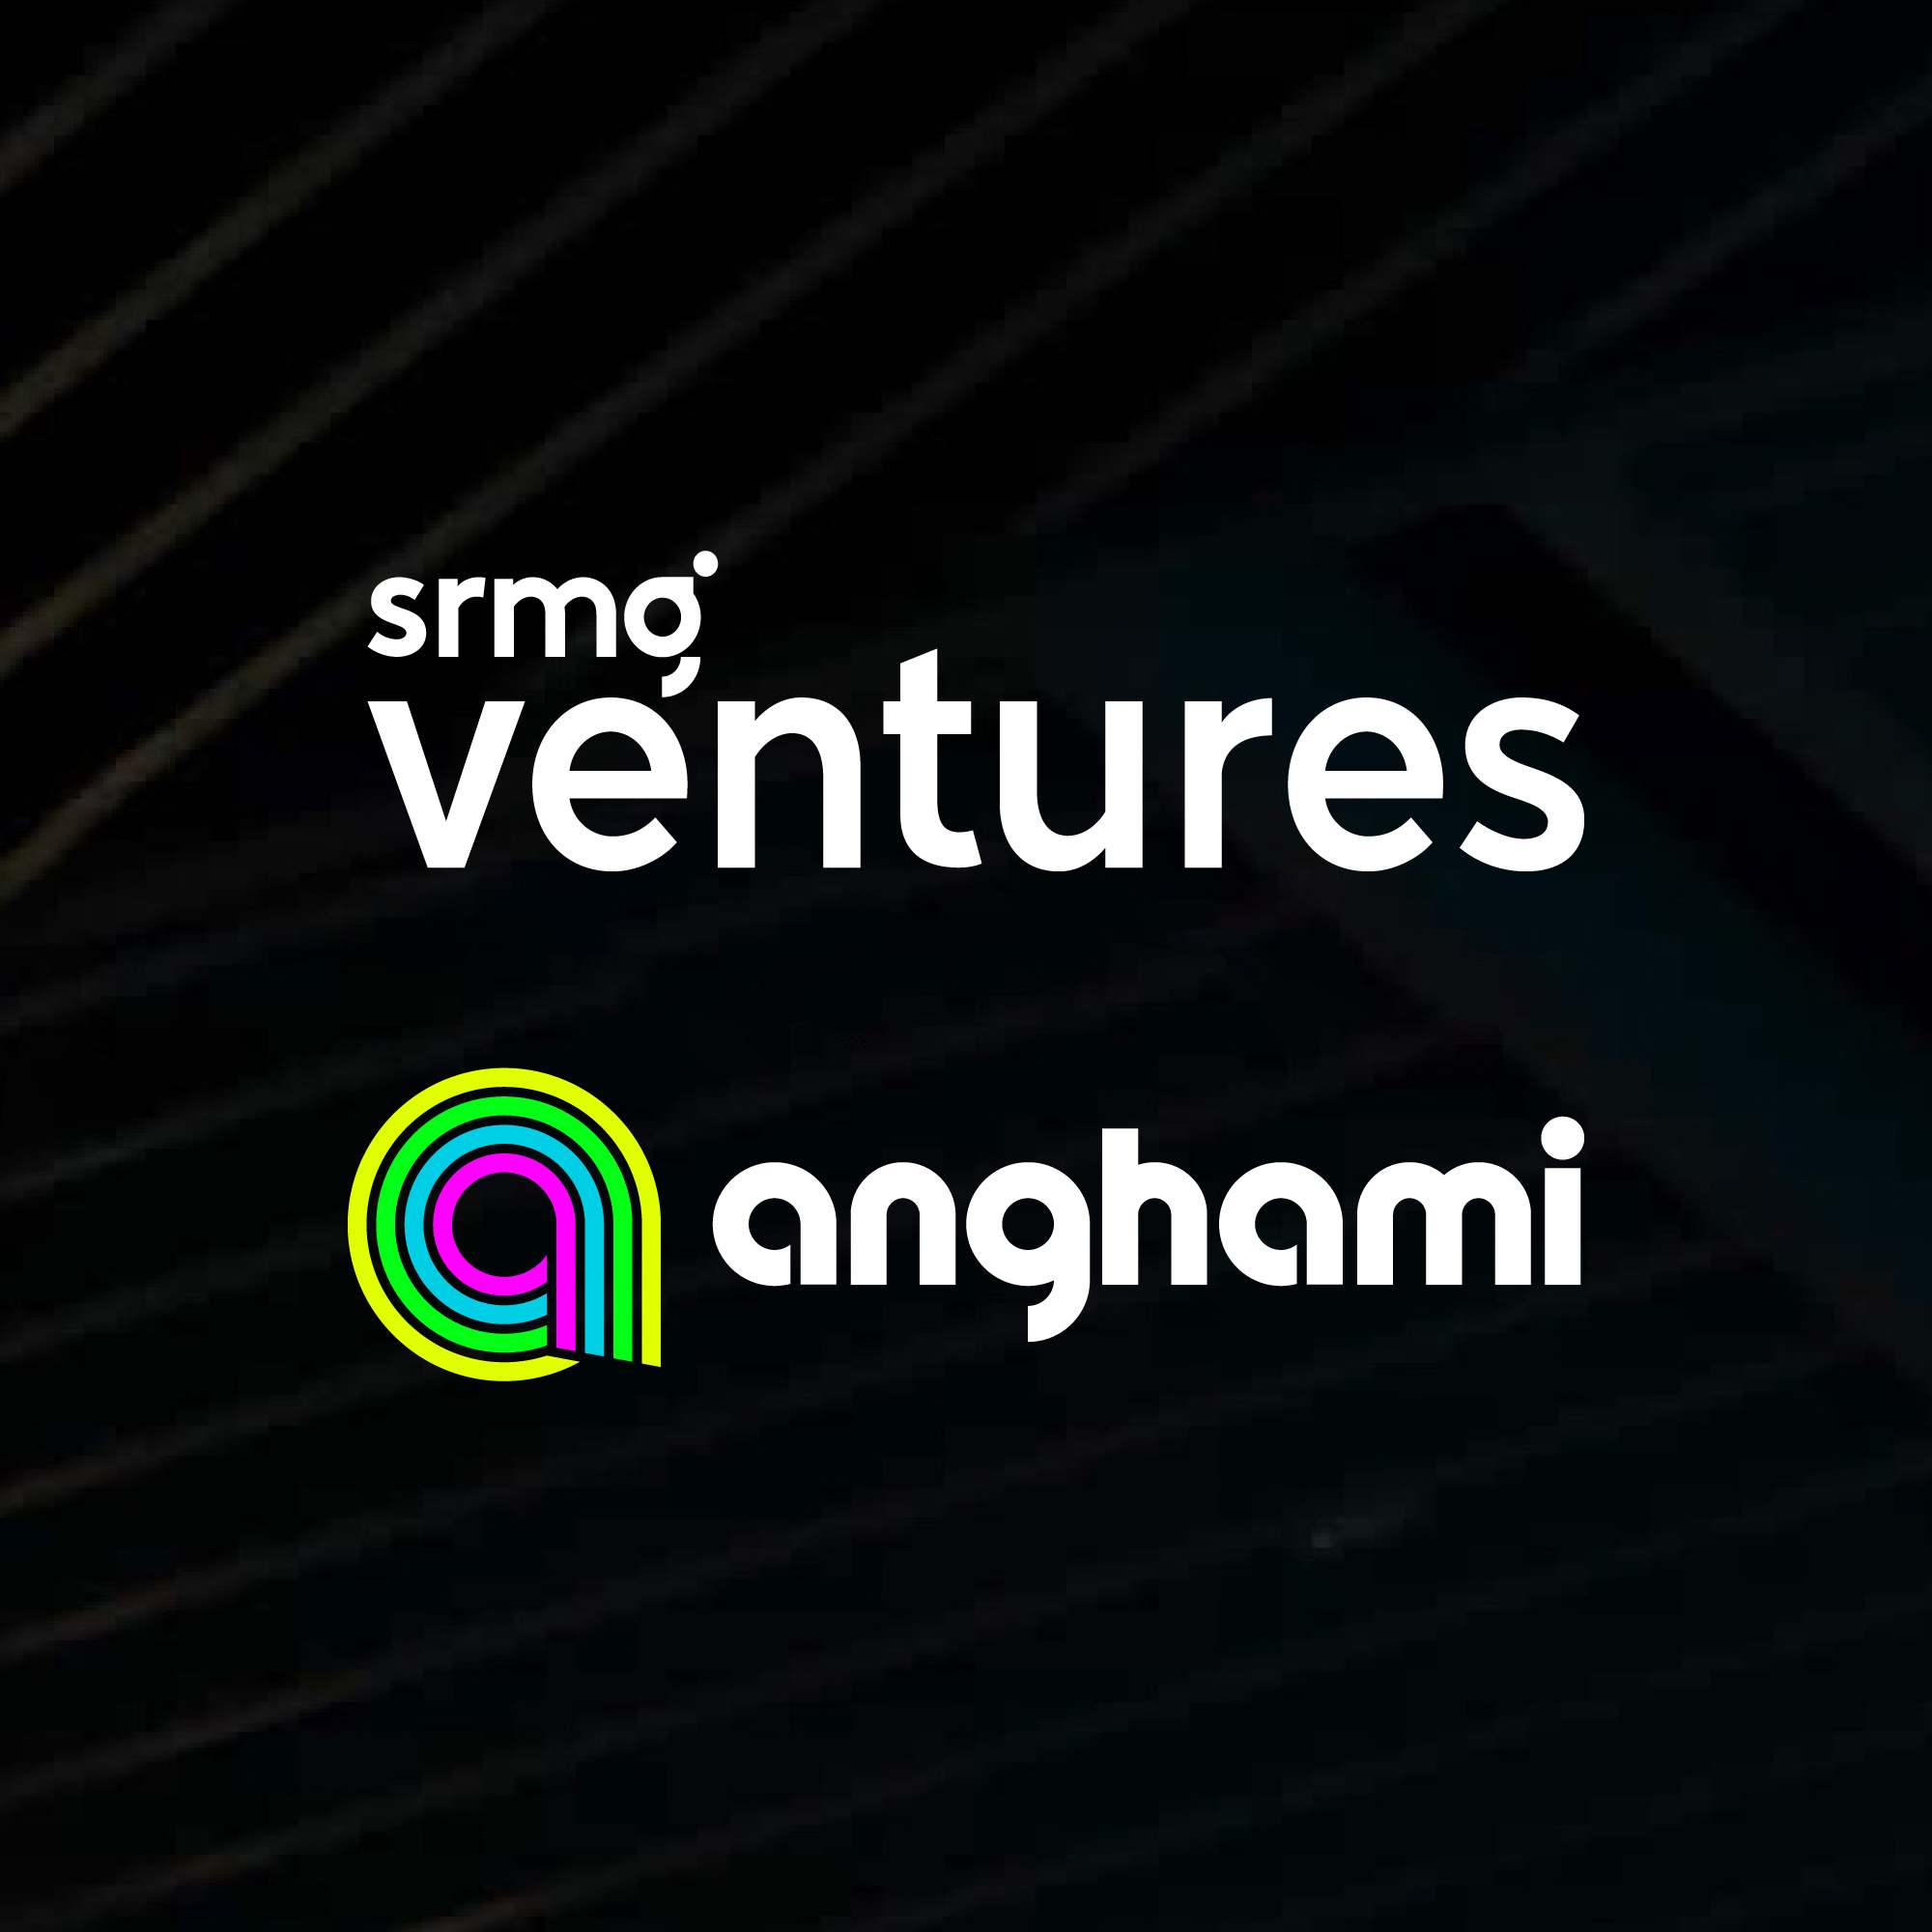 SRMG VENTURES ANNOUNCES STRATEGIC INVESTMENT IN ANGHAMI, MENA’S LEADING MUSIC AND ENTERTAINMENT STREAMING PLATFORM